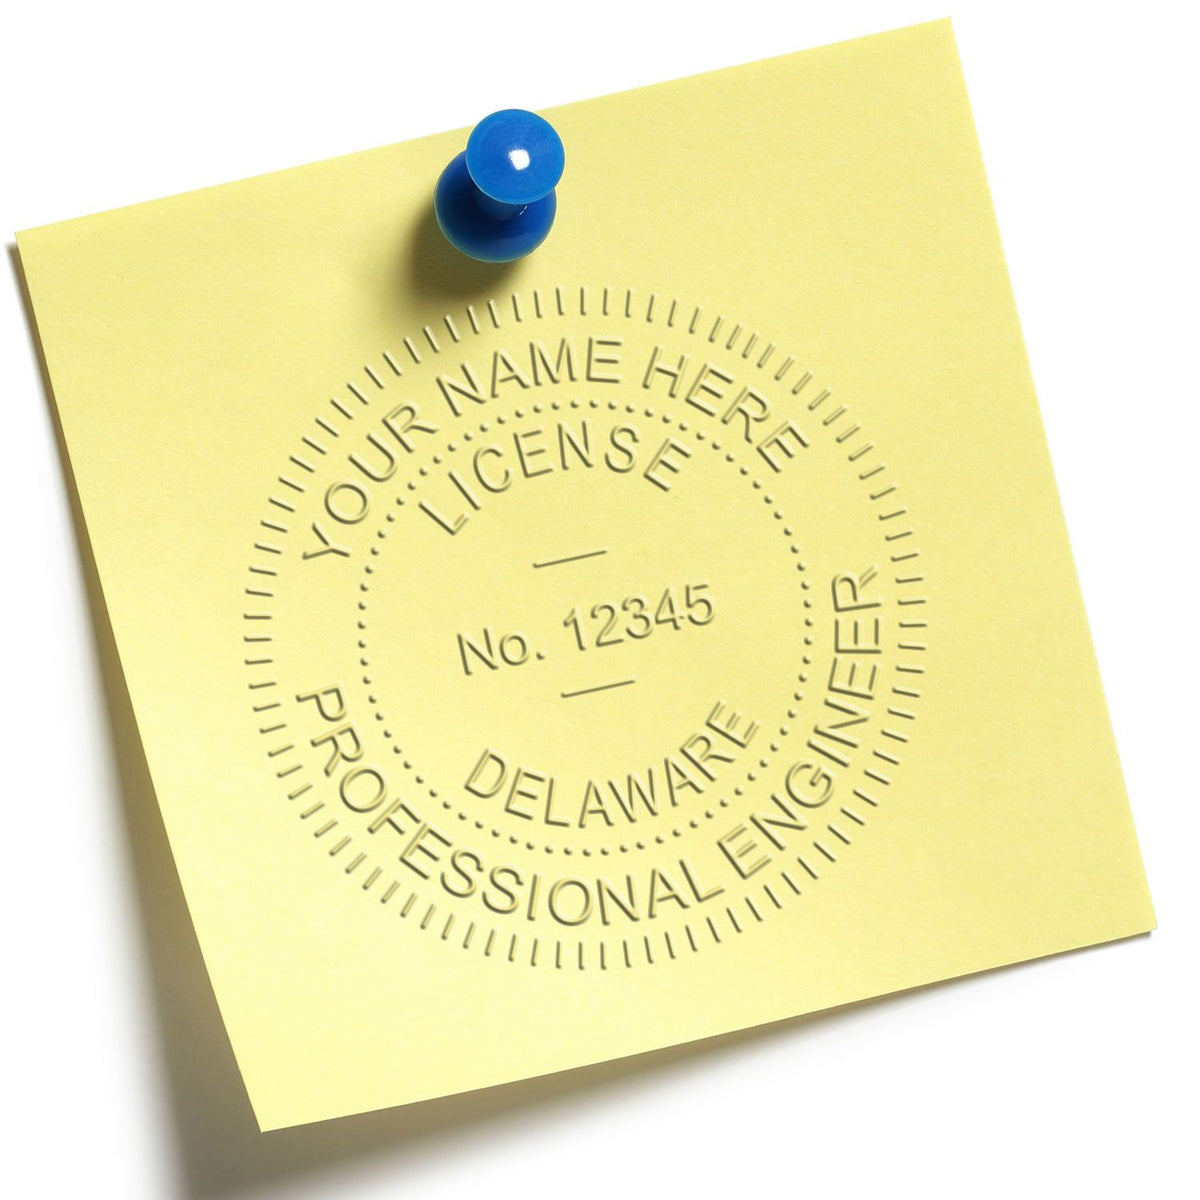 A stamped impression of the State of Delaware Extended Long Reach Engineer Seal in this stylish lifestyle photo, setting the tone for a unique and personalized product.